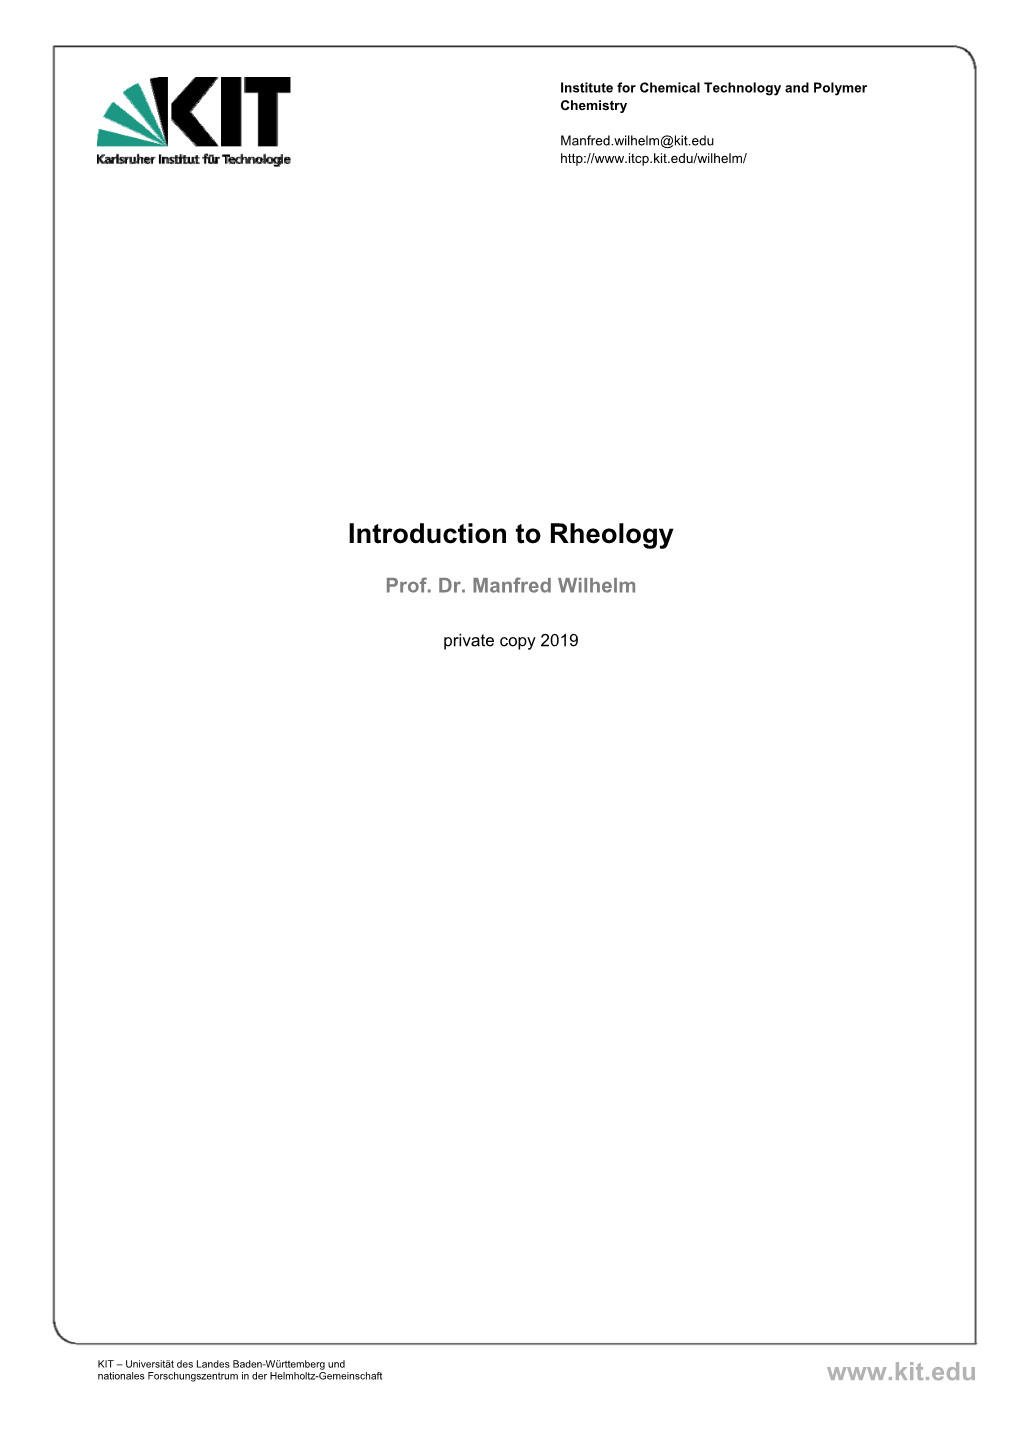 Introduction to Rheology